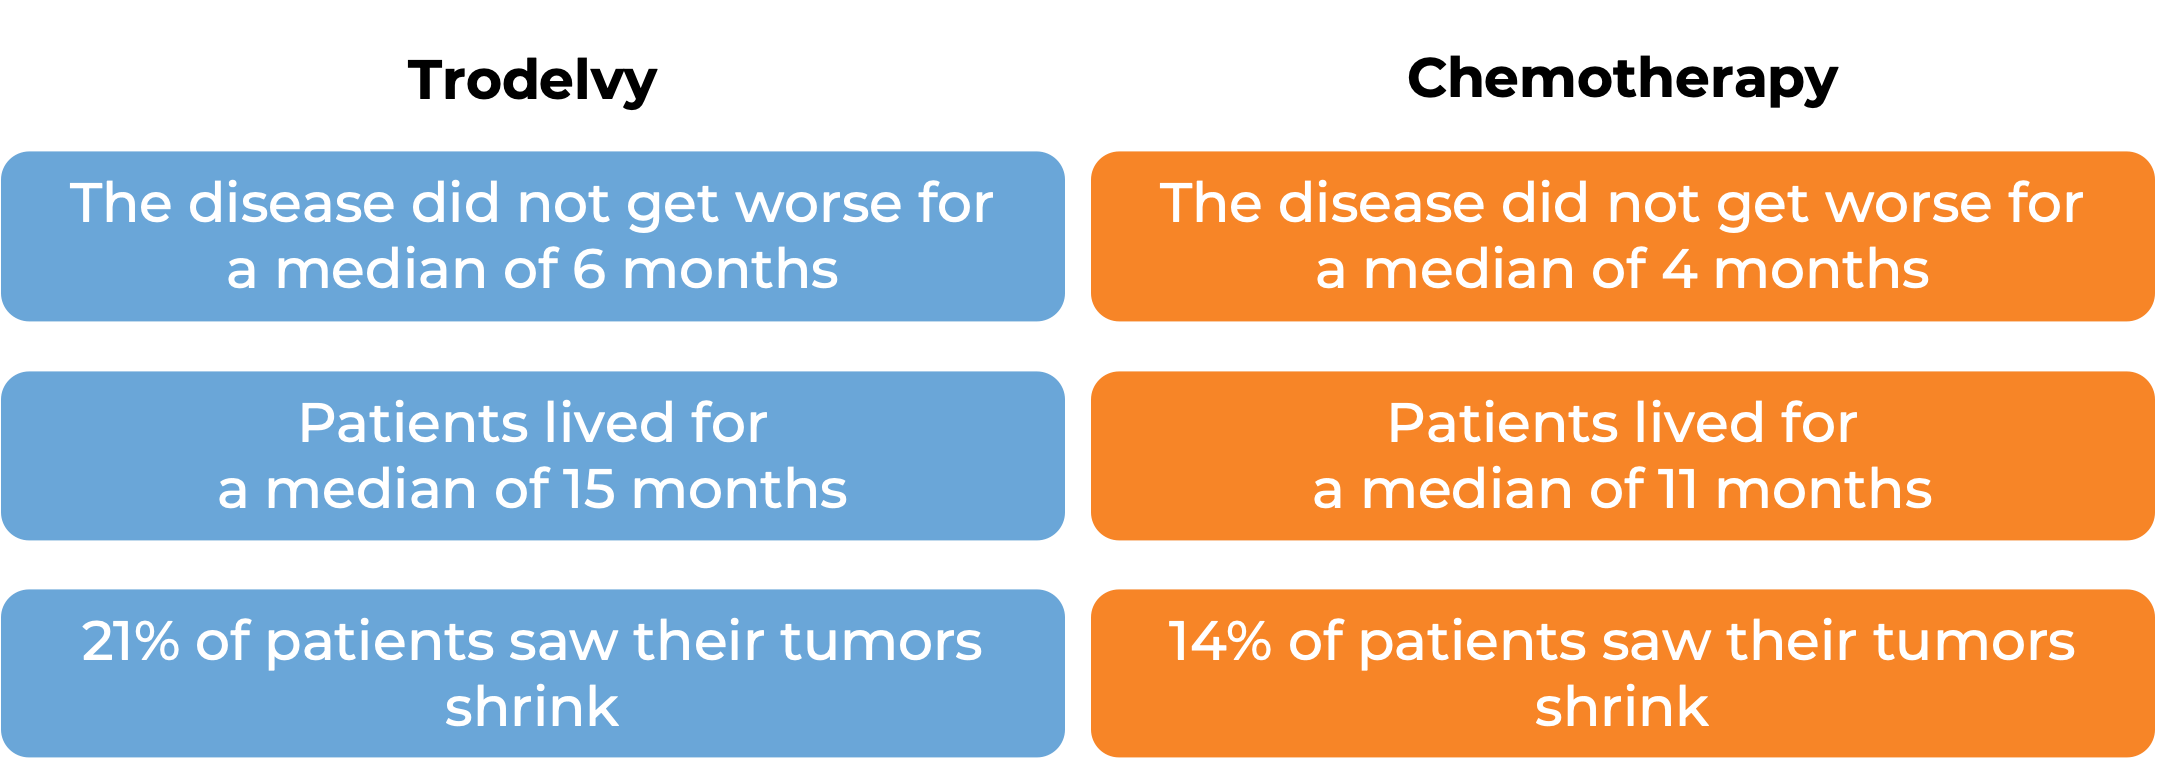 Results after treatment with Trodelvy vs chemo (diagram)